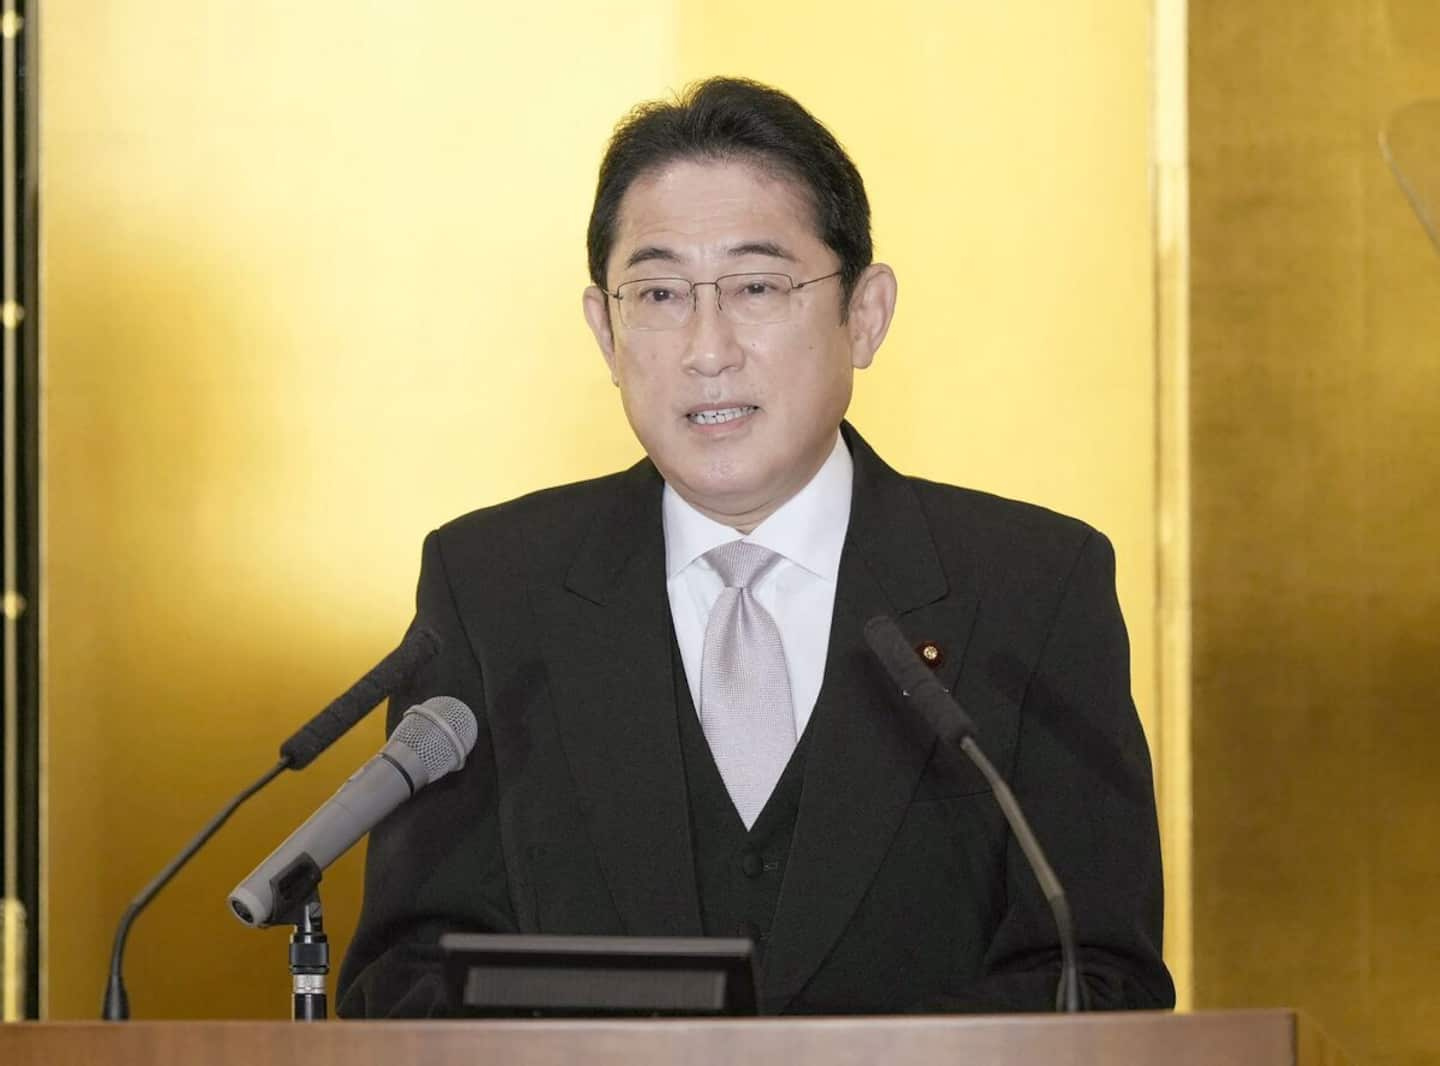 Japanese Prime Minister to visit Canada next week